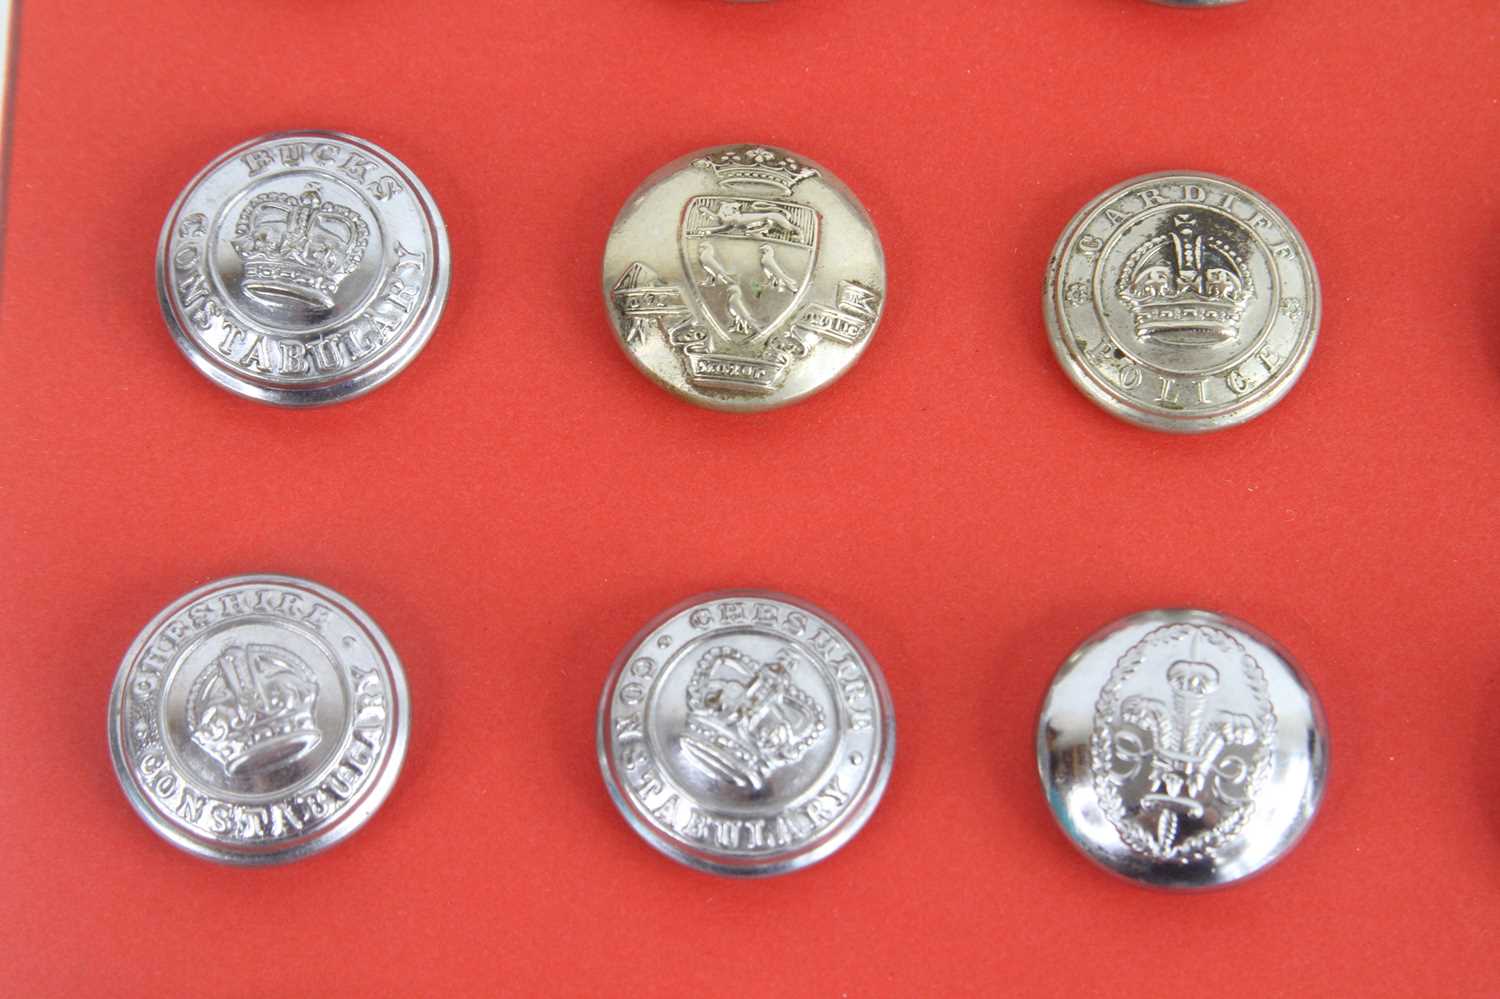 A Large collection of Police uniform buttons arranged alphabetically A-M, M-S & T-Z displayed on - Image 11 of 12